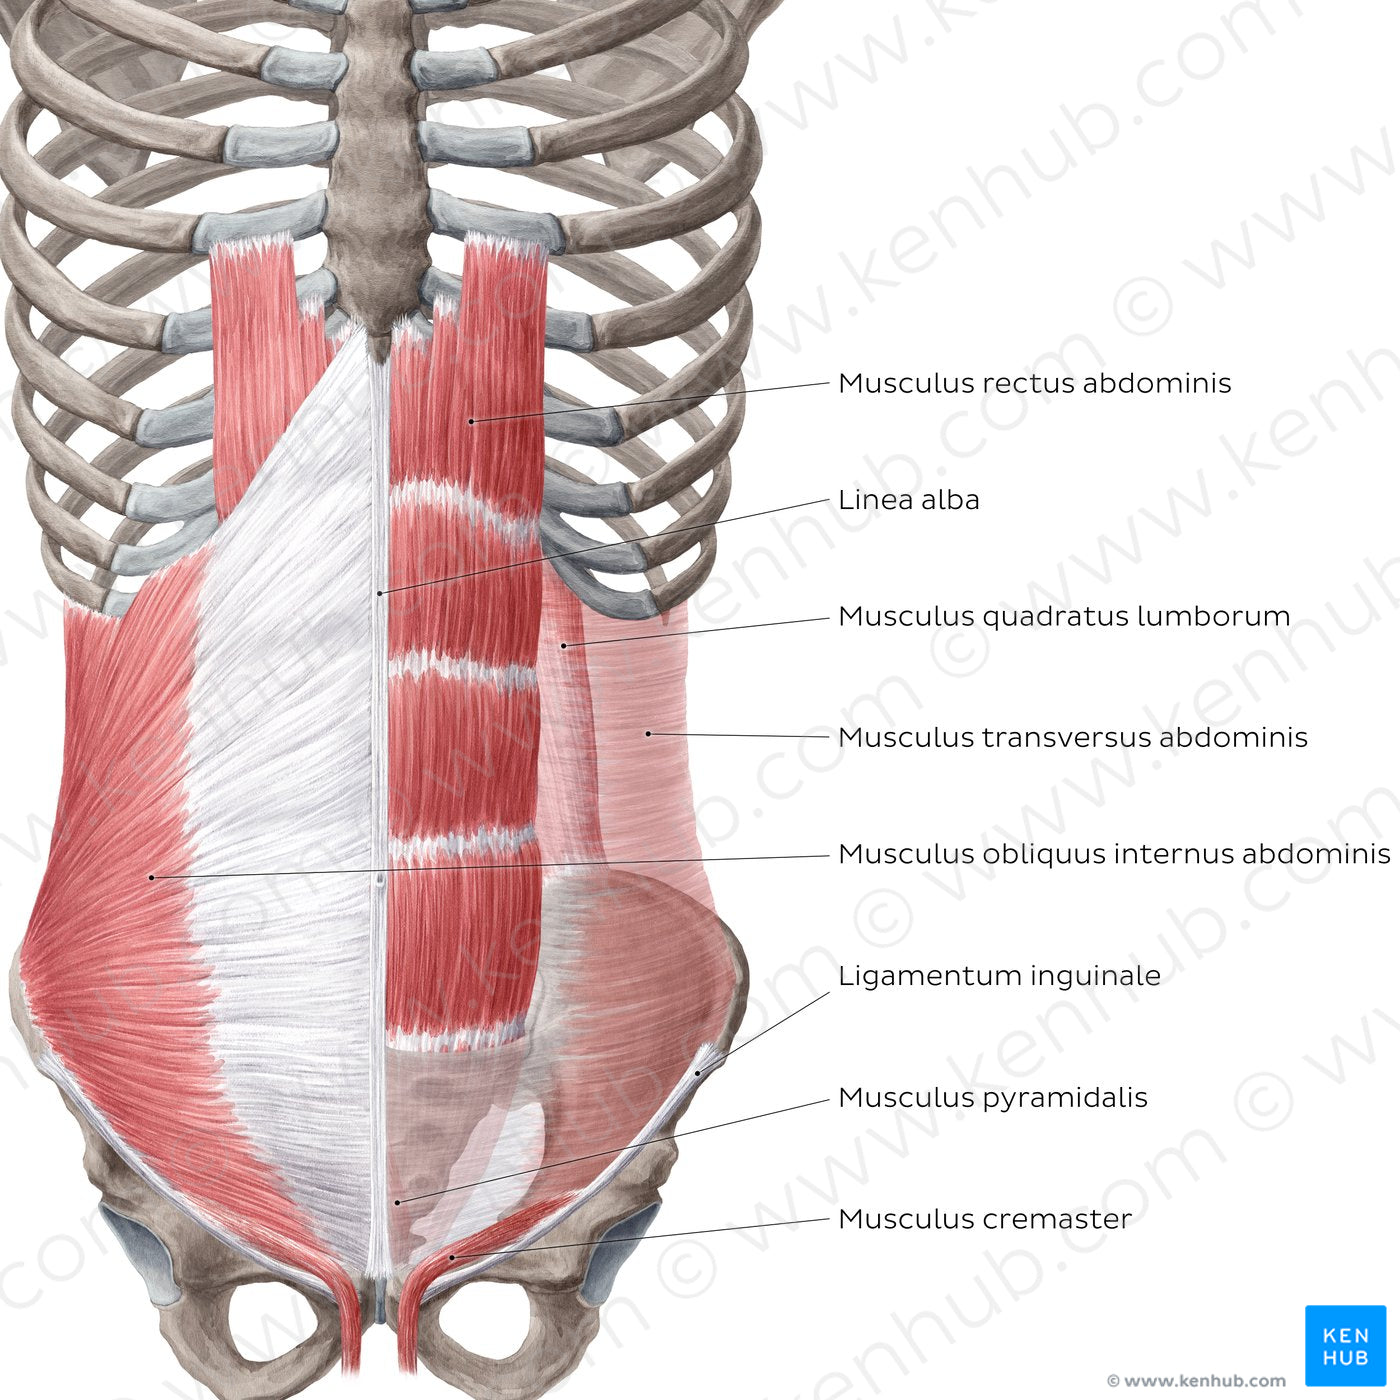 Muscles of the abdominal wall (Latin)